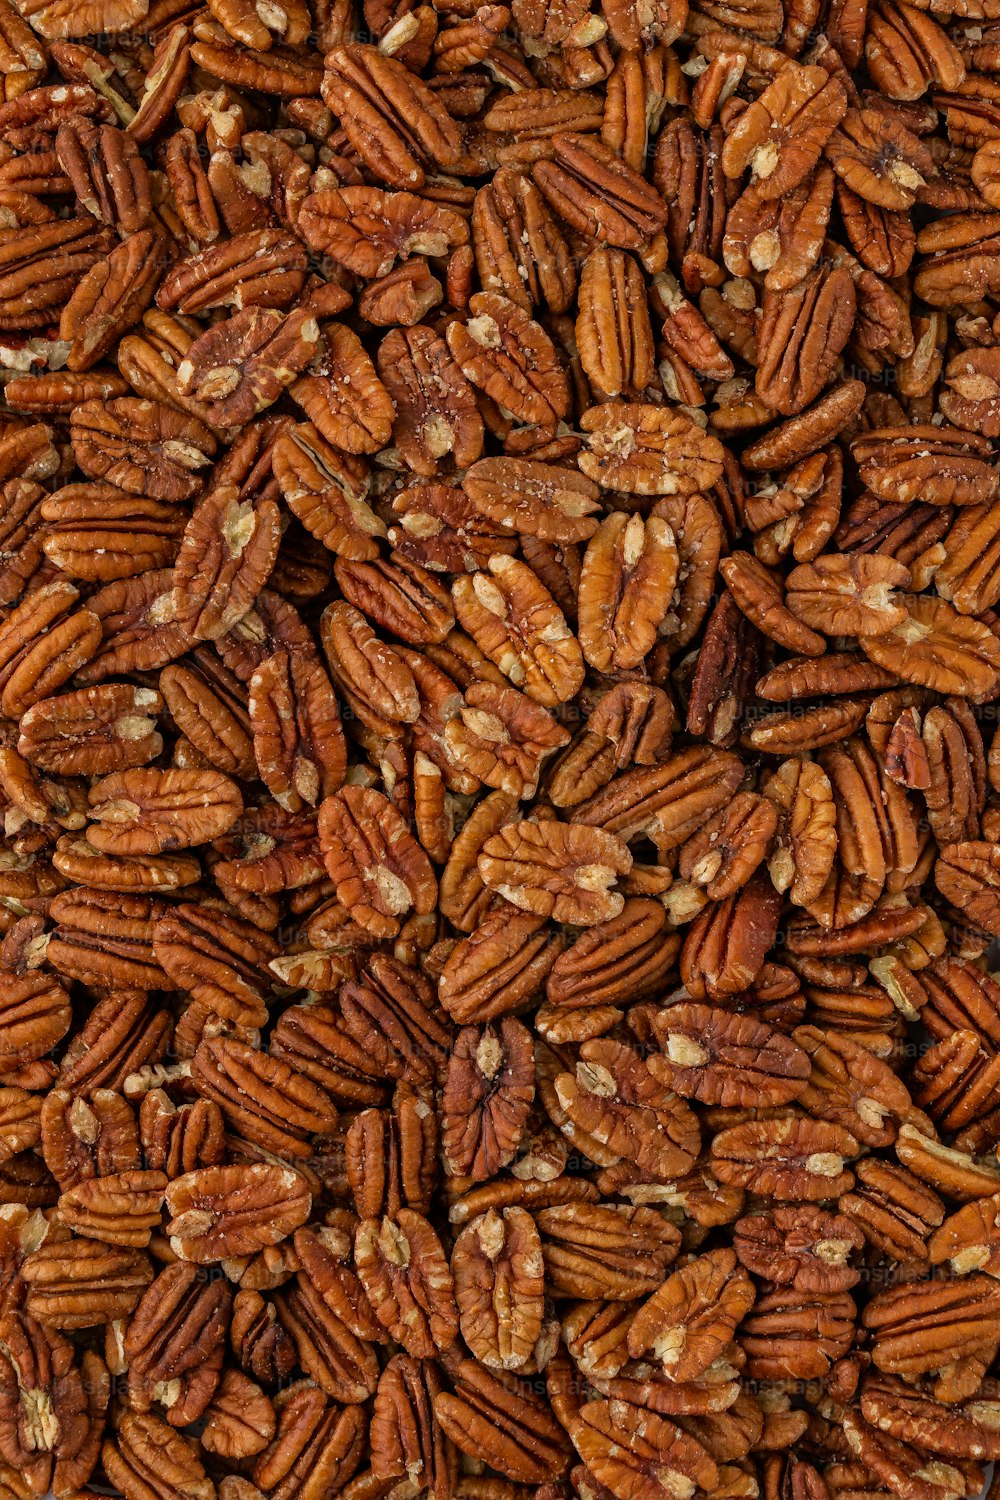 a pile of pecans is shown close up